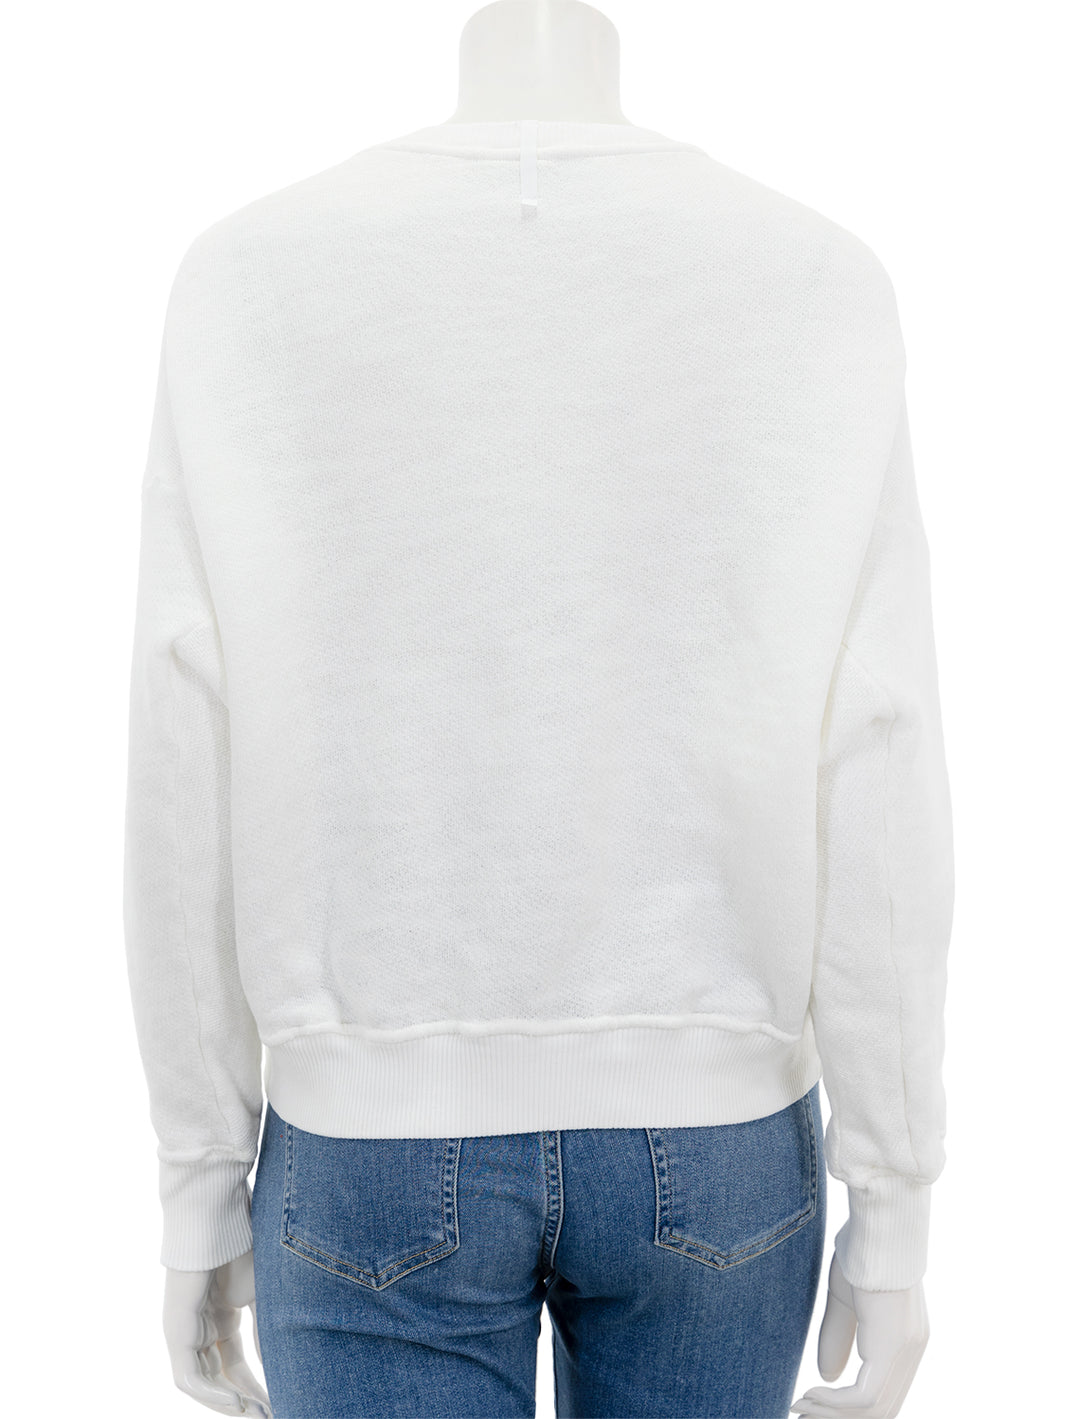 Back view of ASKK NY's oversized sweatshirt in miss you more.